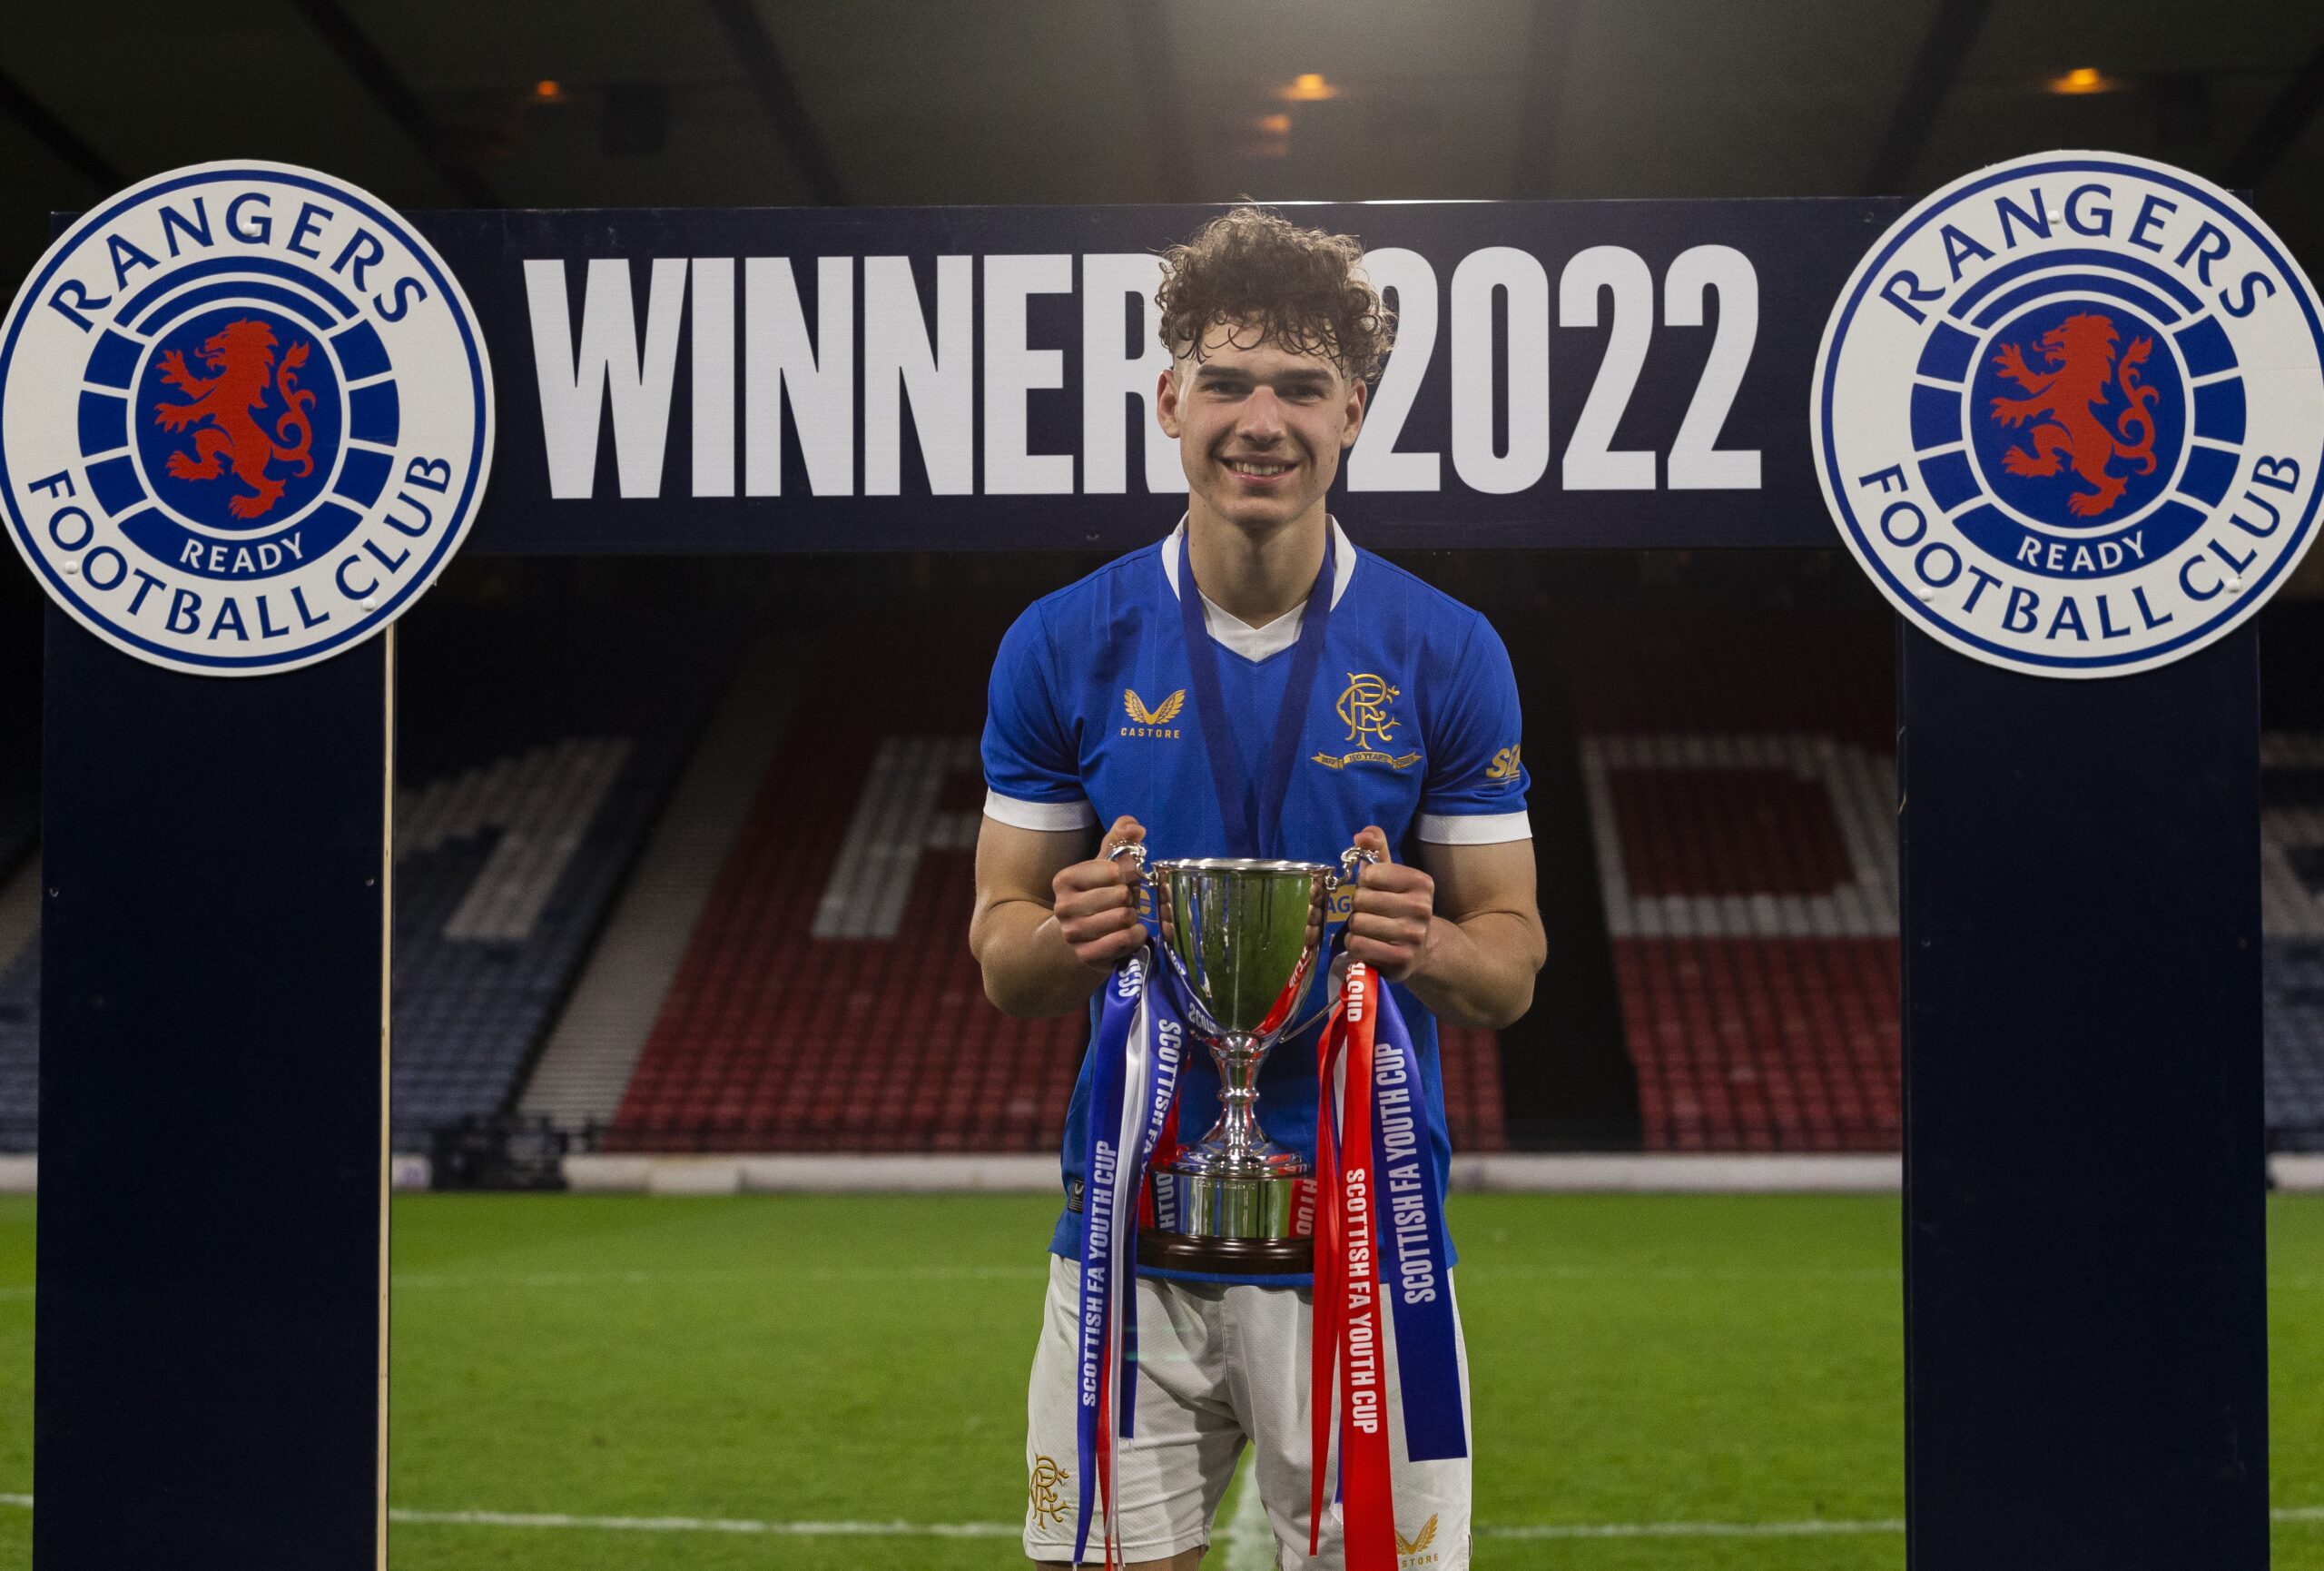 Kevin Ciubotaru wins the Scottish Youth Cup with Rangers!